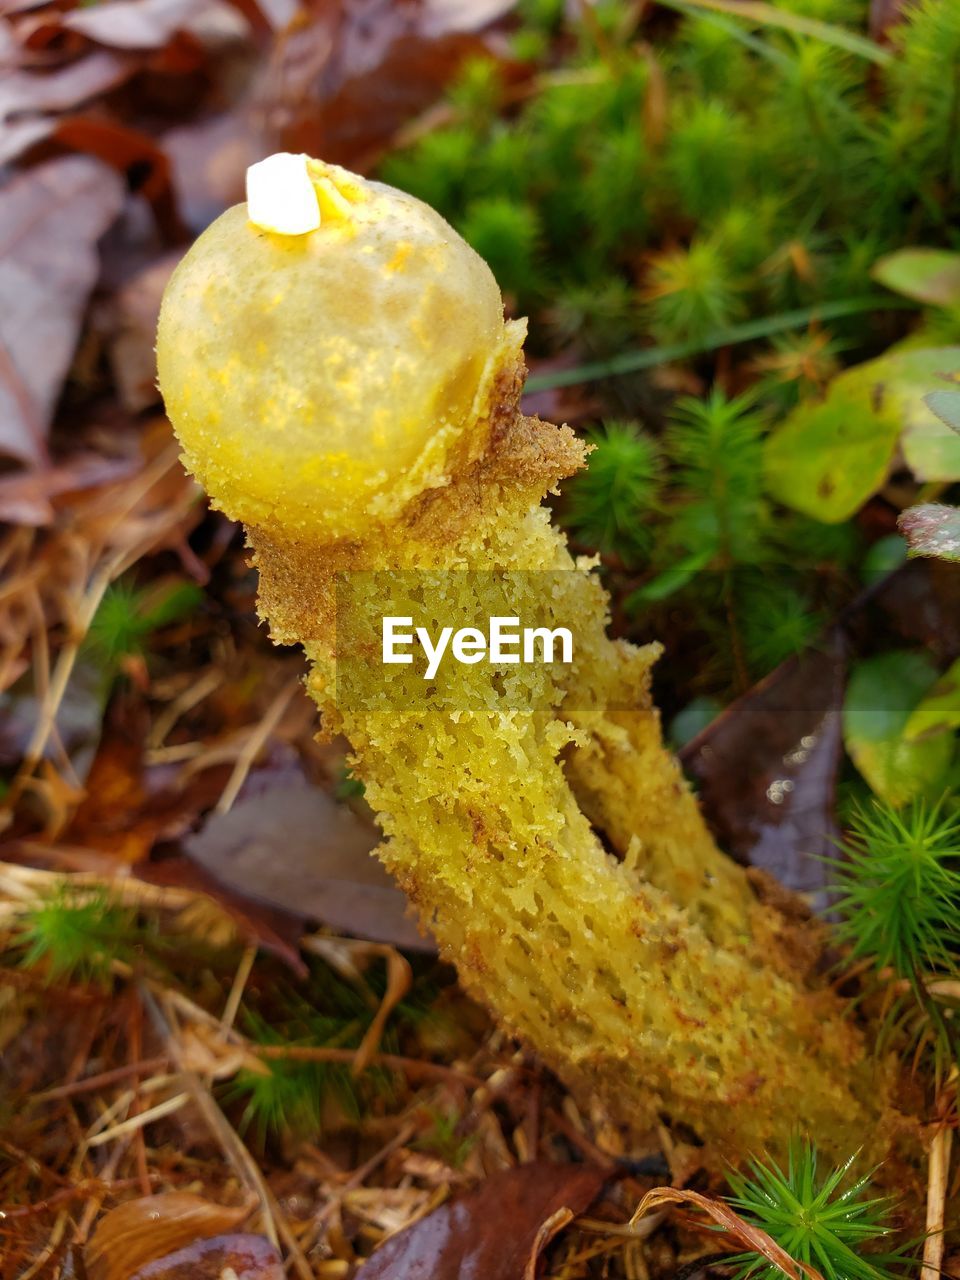 CLOSE-UP OF YELLOW MUSHROOM GROWING IN FIELD